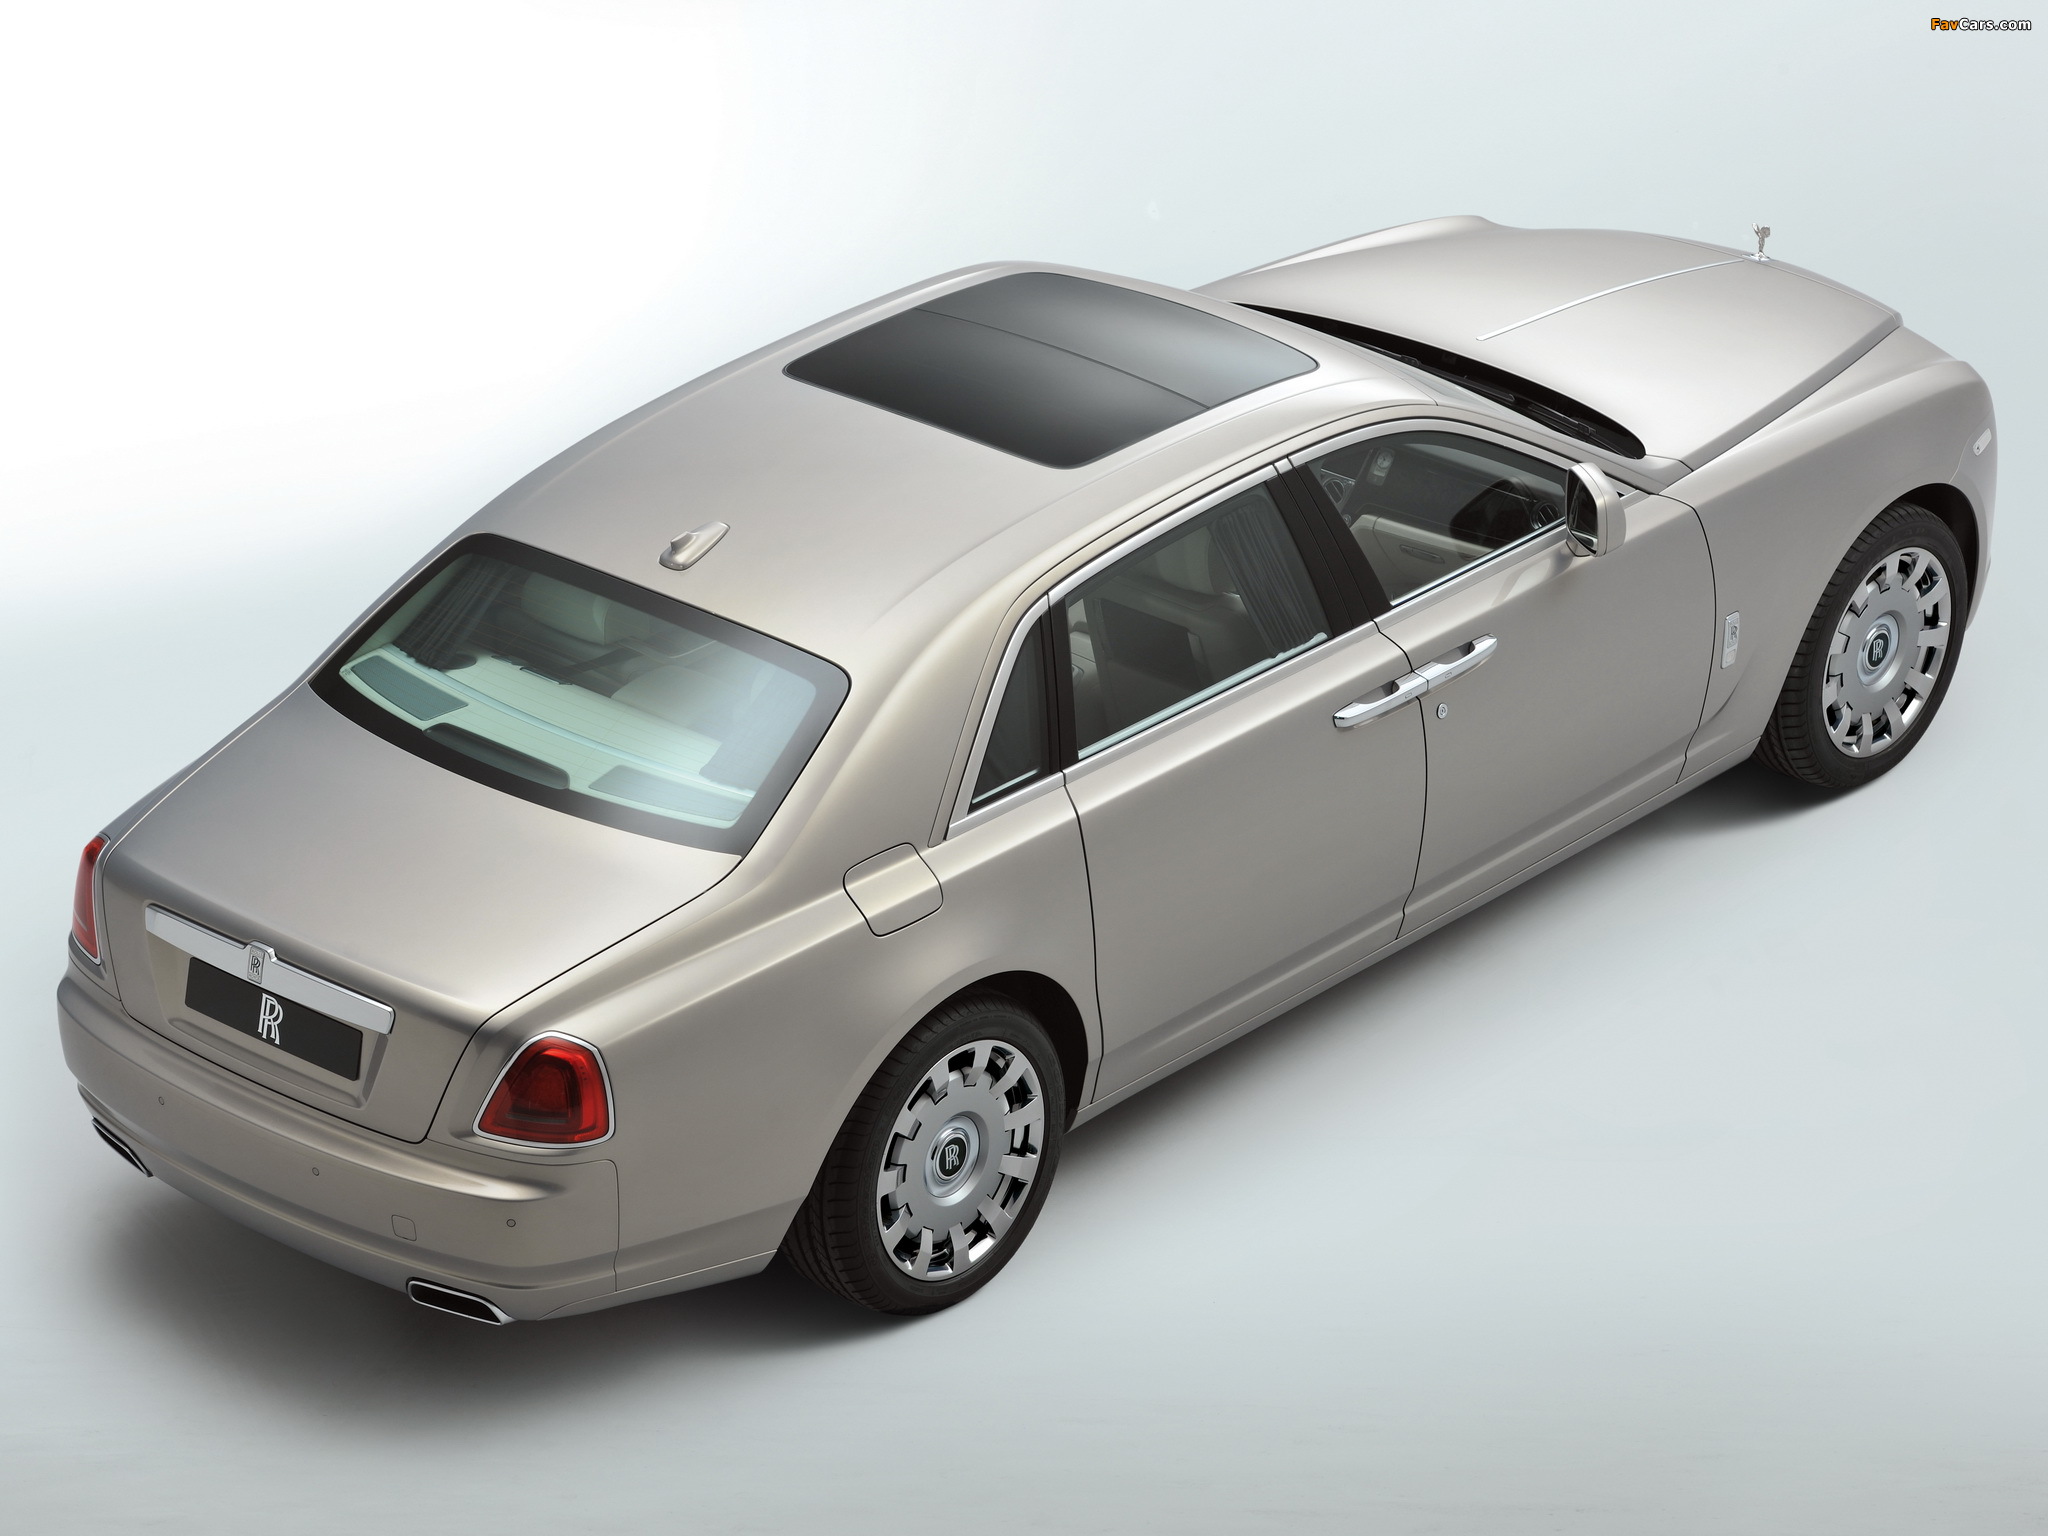 Rolls-Royce Ghost Extended Wheelbase 2011 pictures (2048 x 1536)